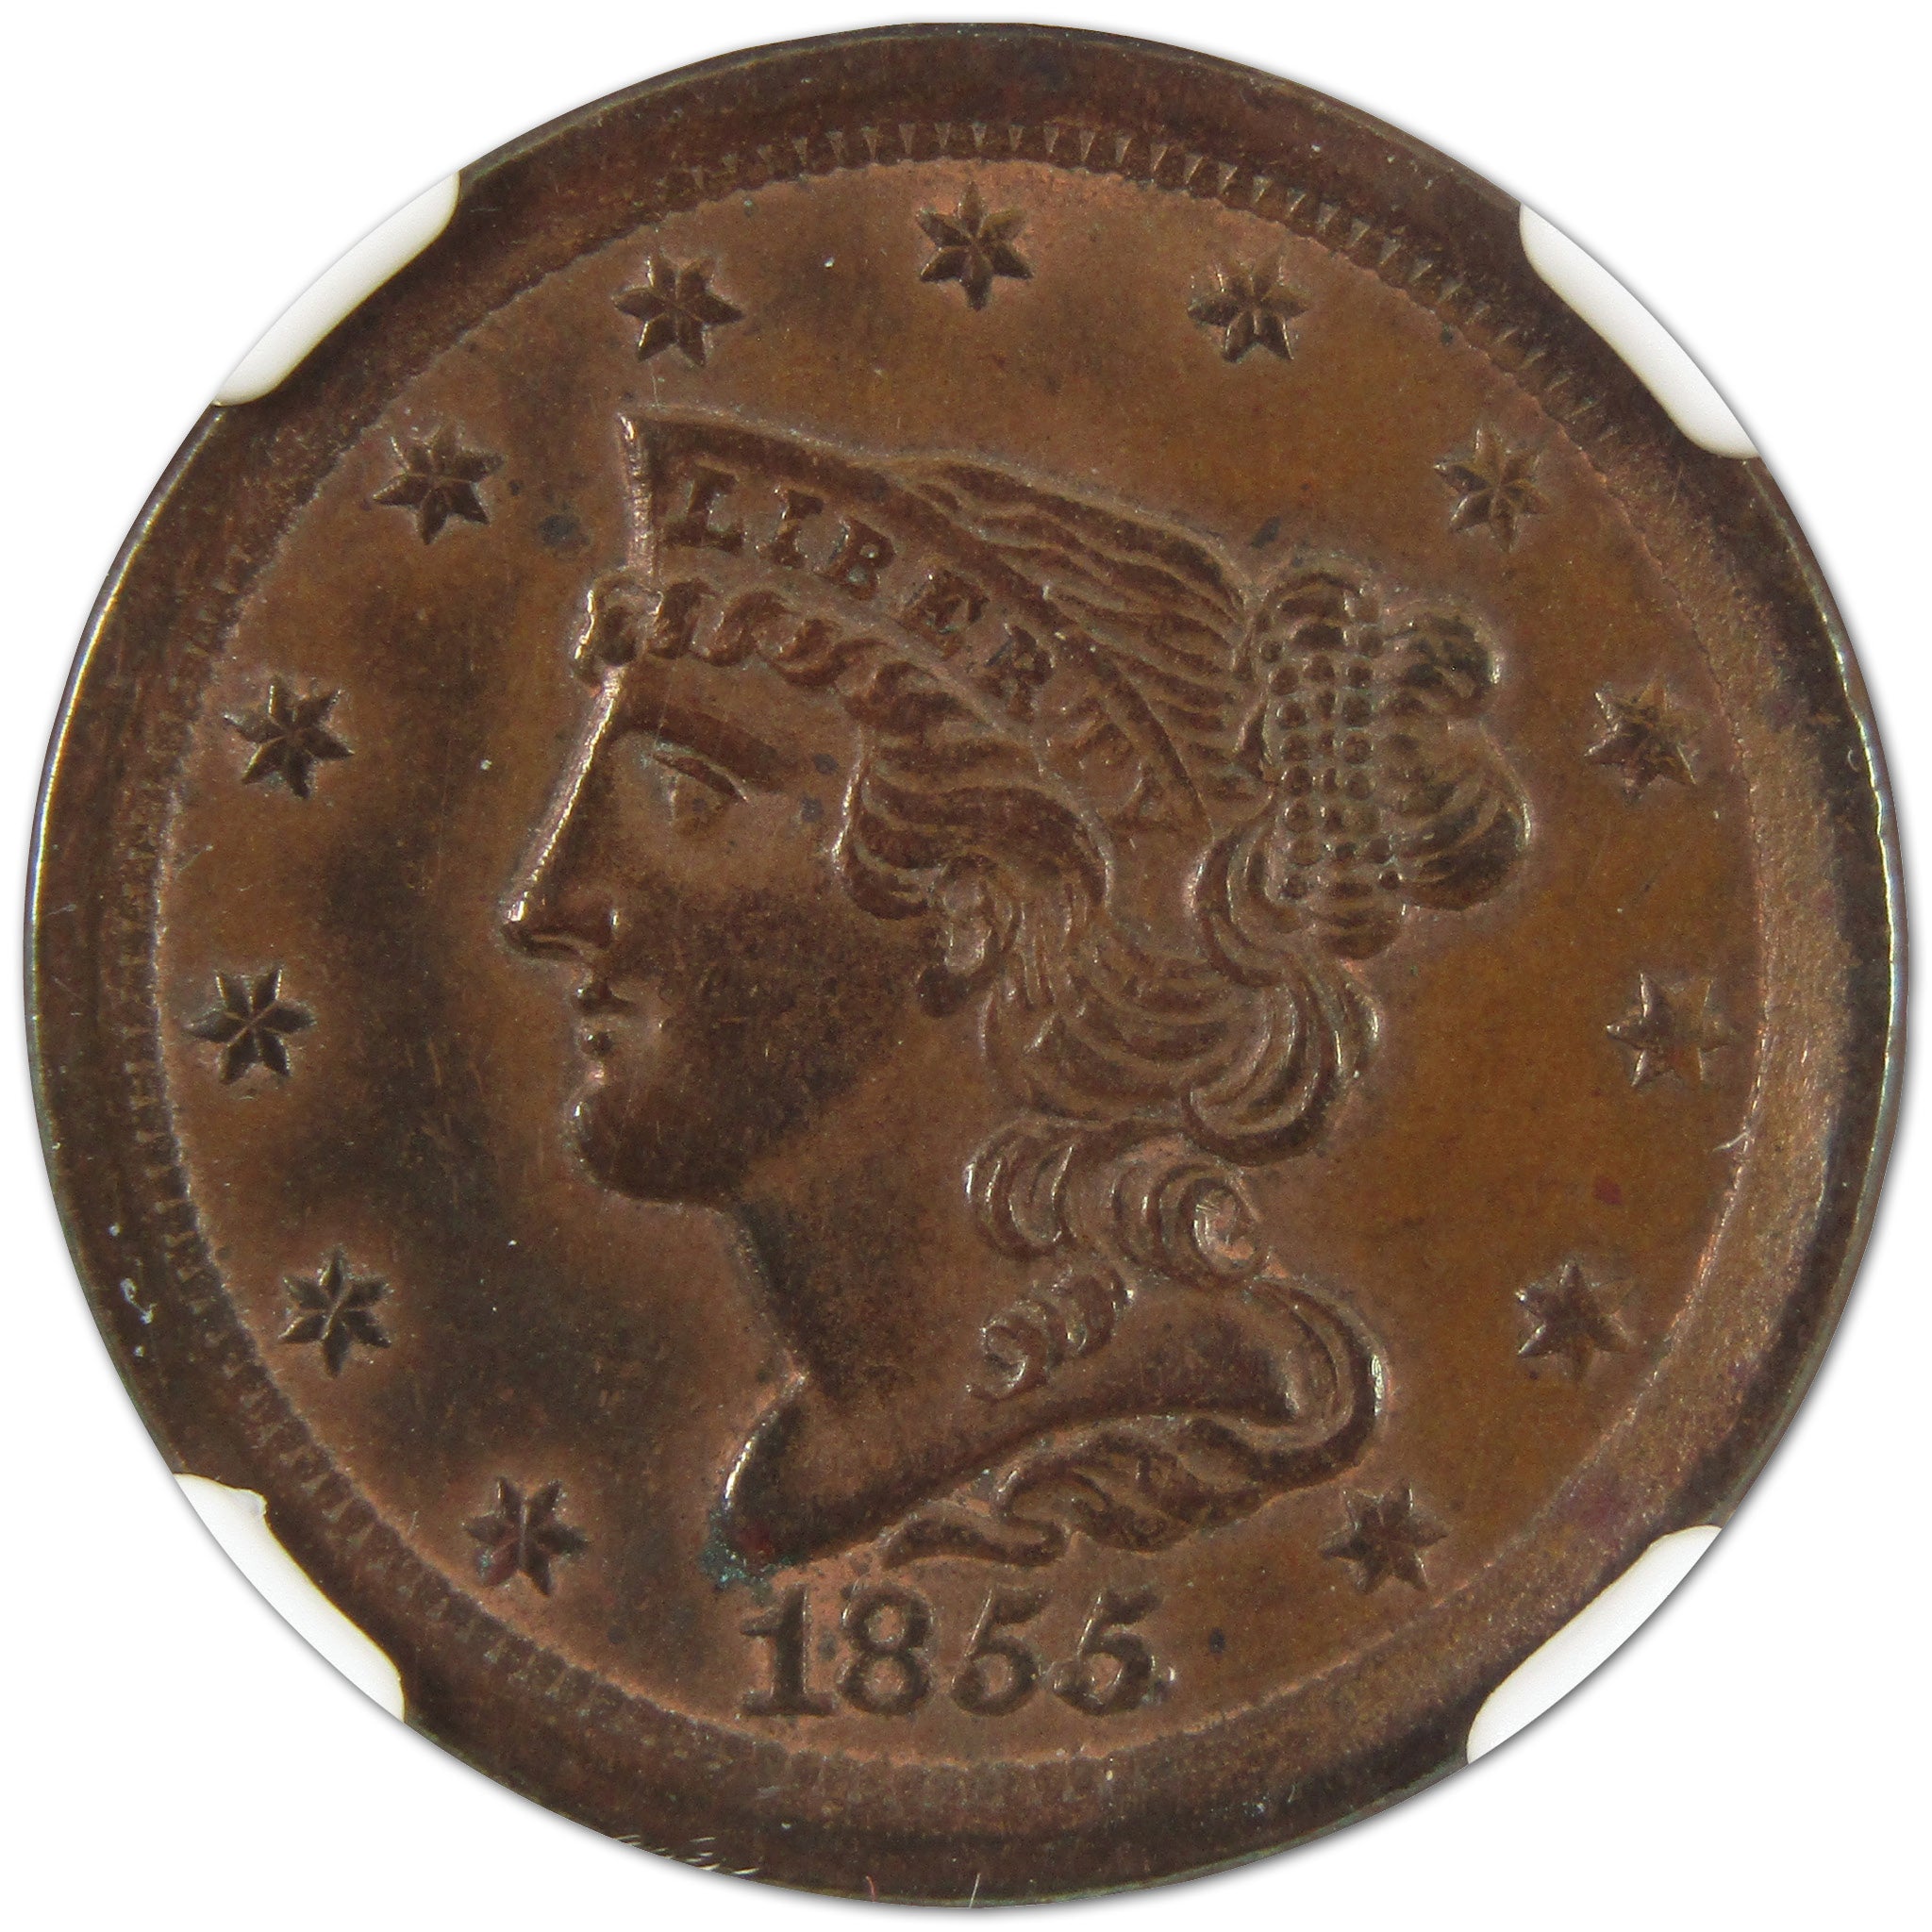 1855 C-1 Braided Hair Half Cent Uncirculated Details NGC SKU:I10768